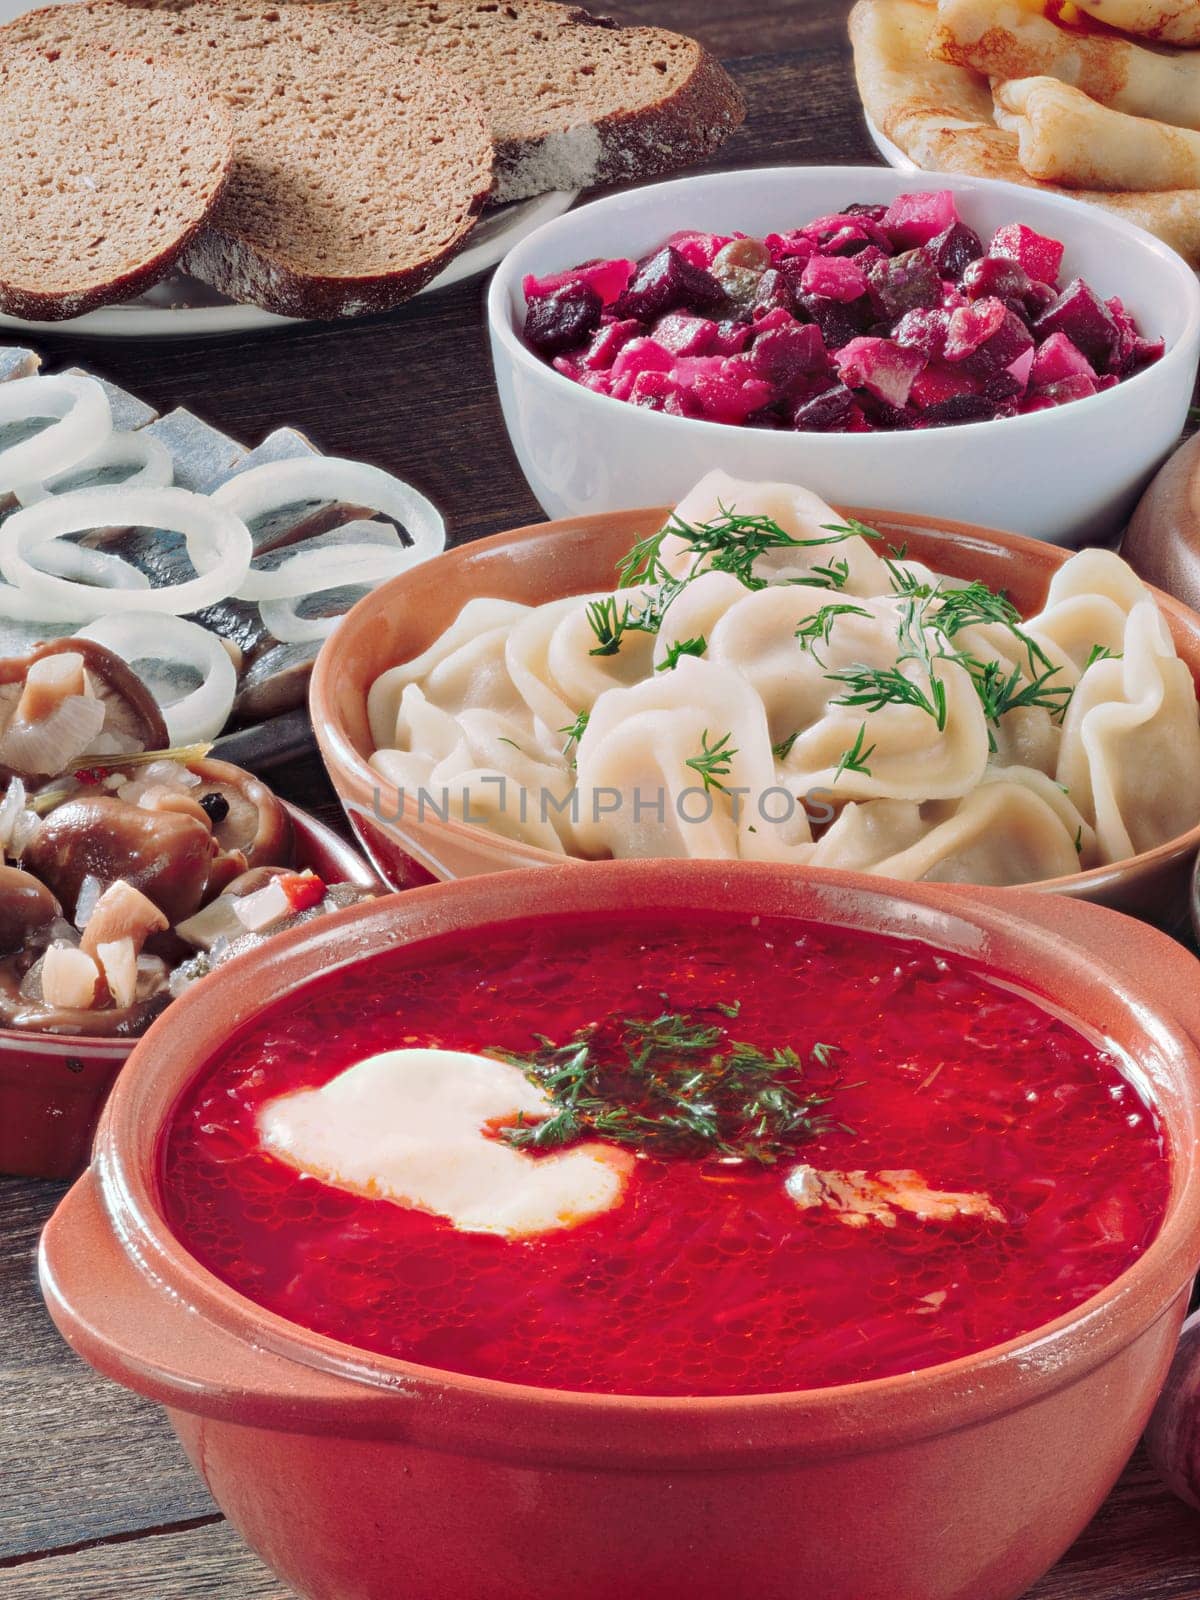 Perspective iew of wooden table with dishes of russian cuisine - borscht, pelmeni, herring, marinated mushrooms, vinaigrette, rye bread, pancakes. Vertical